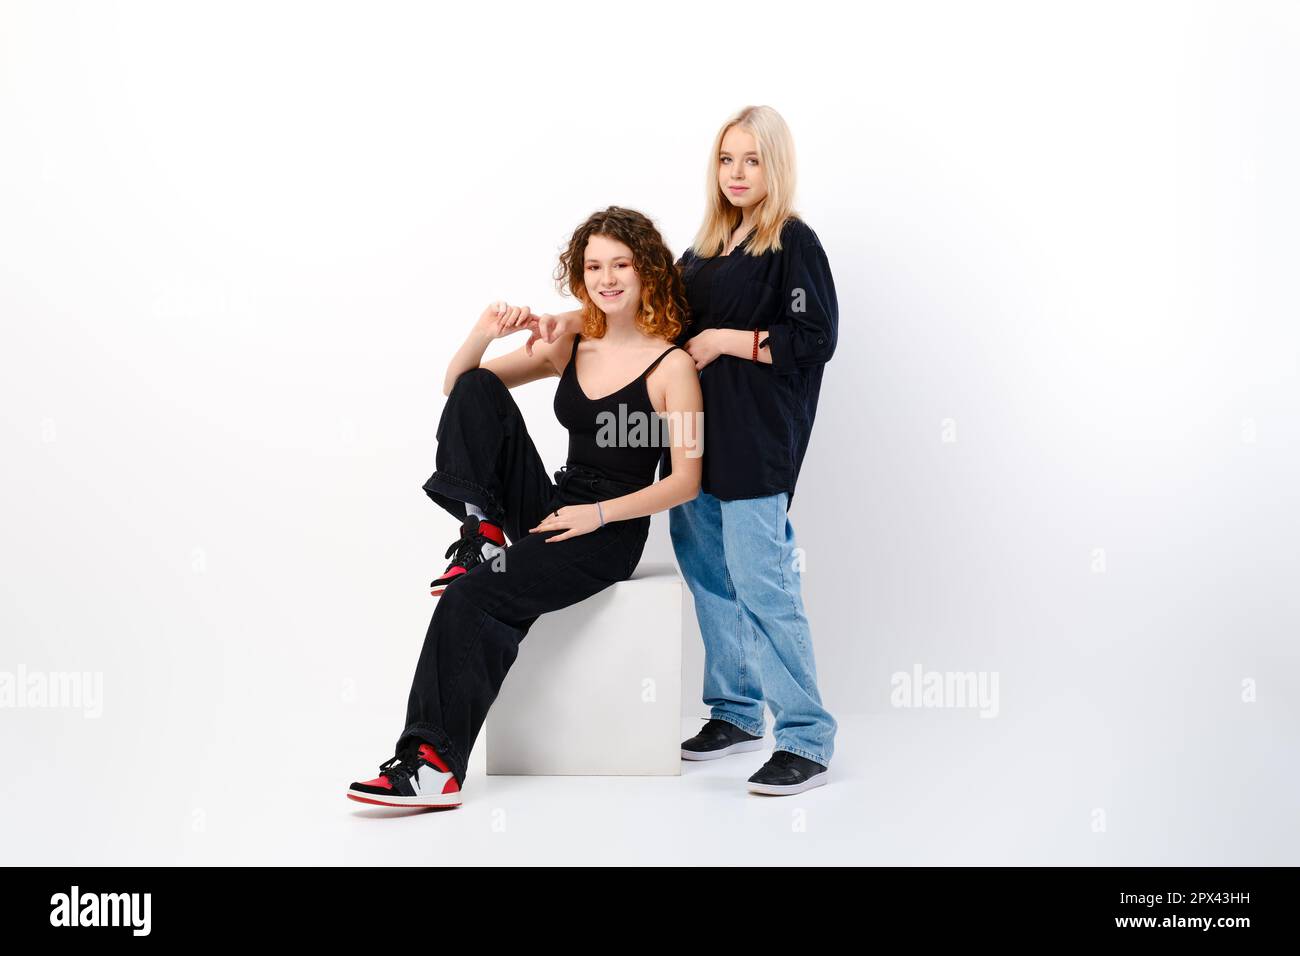 Two positive and funny teen girls together over white studio background Stock Photo